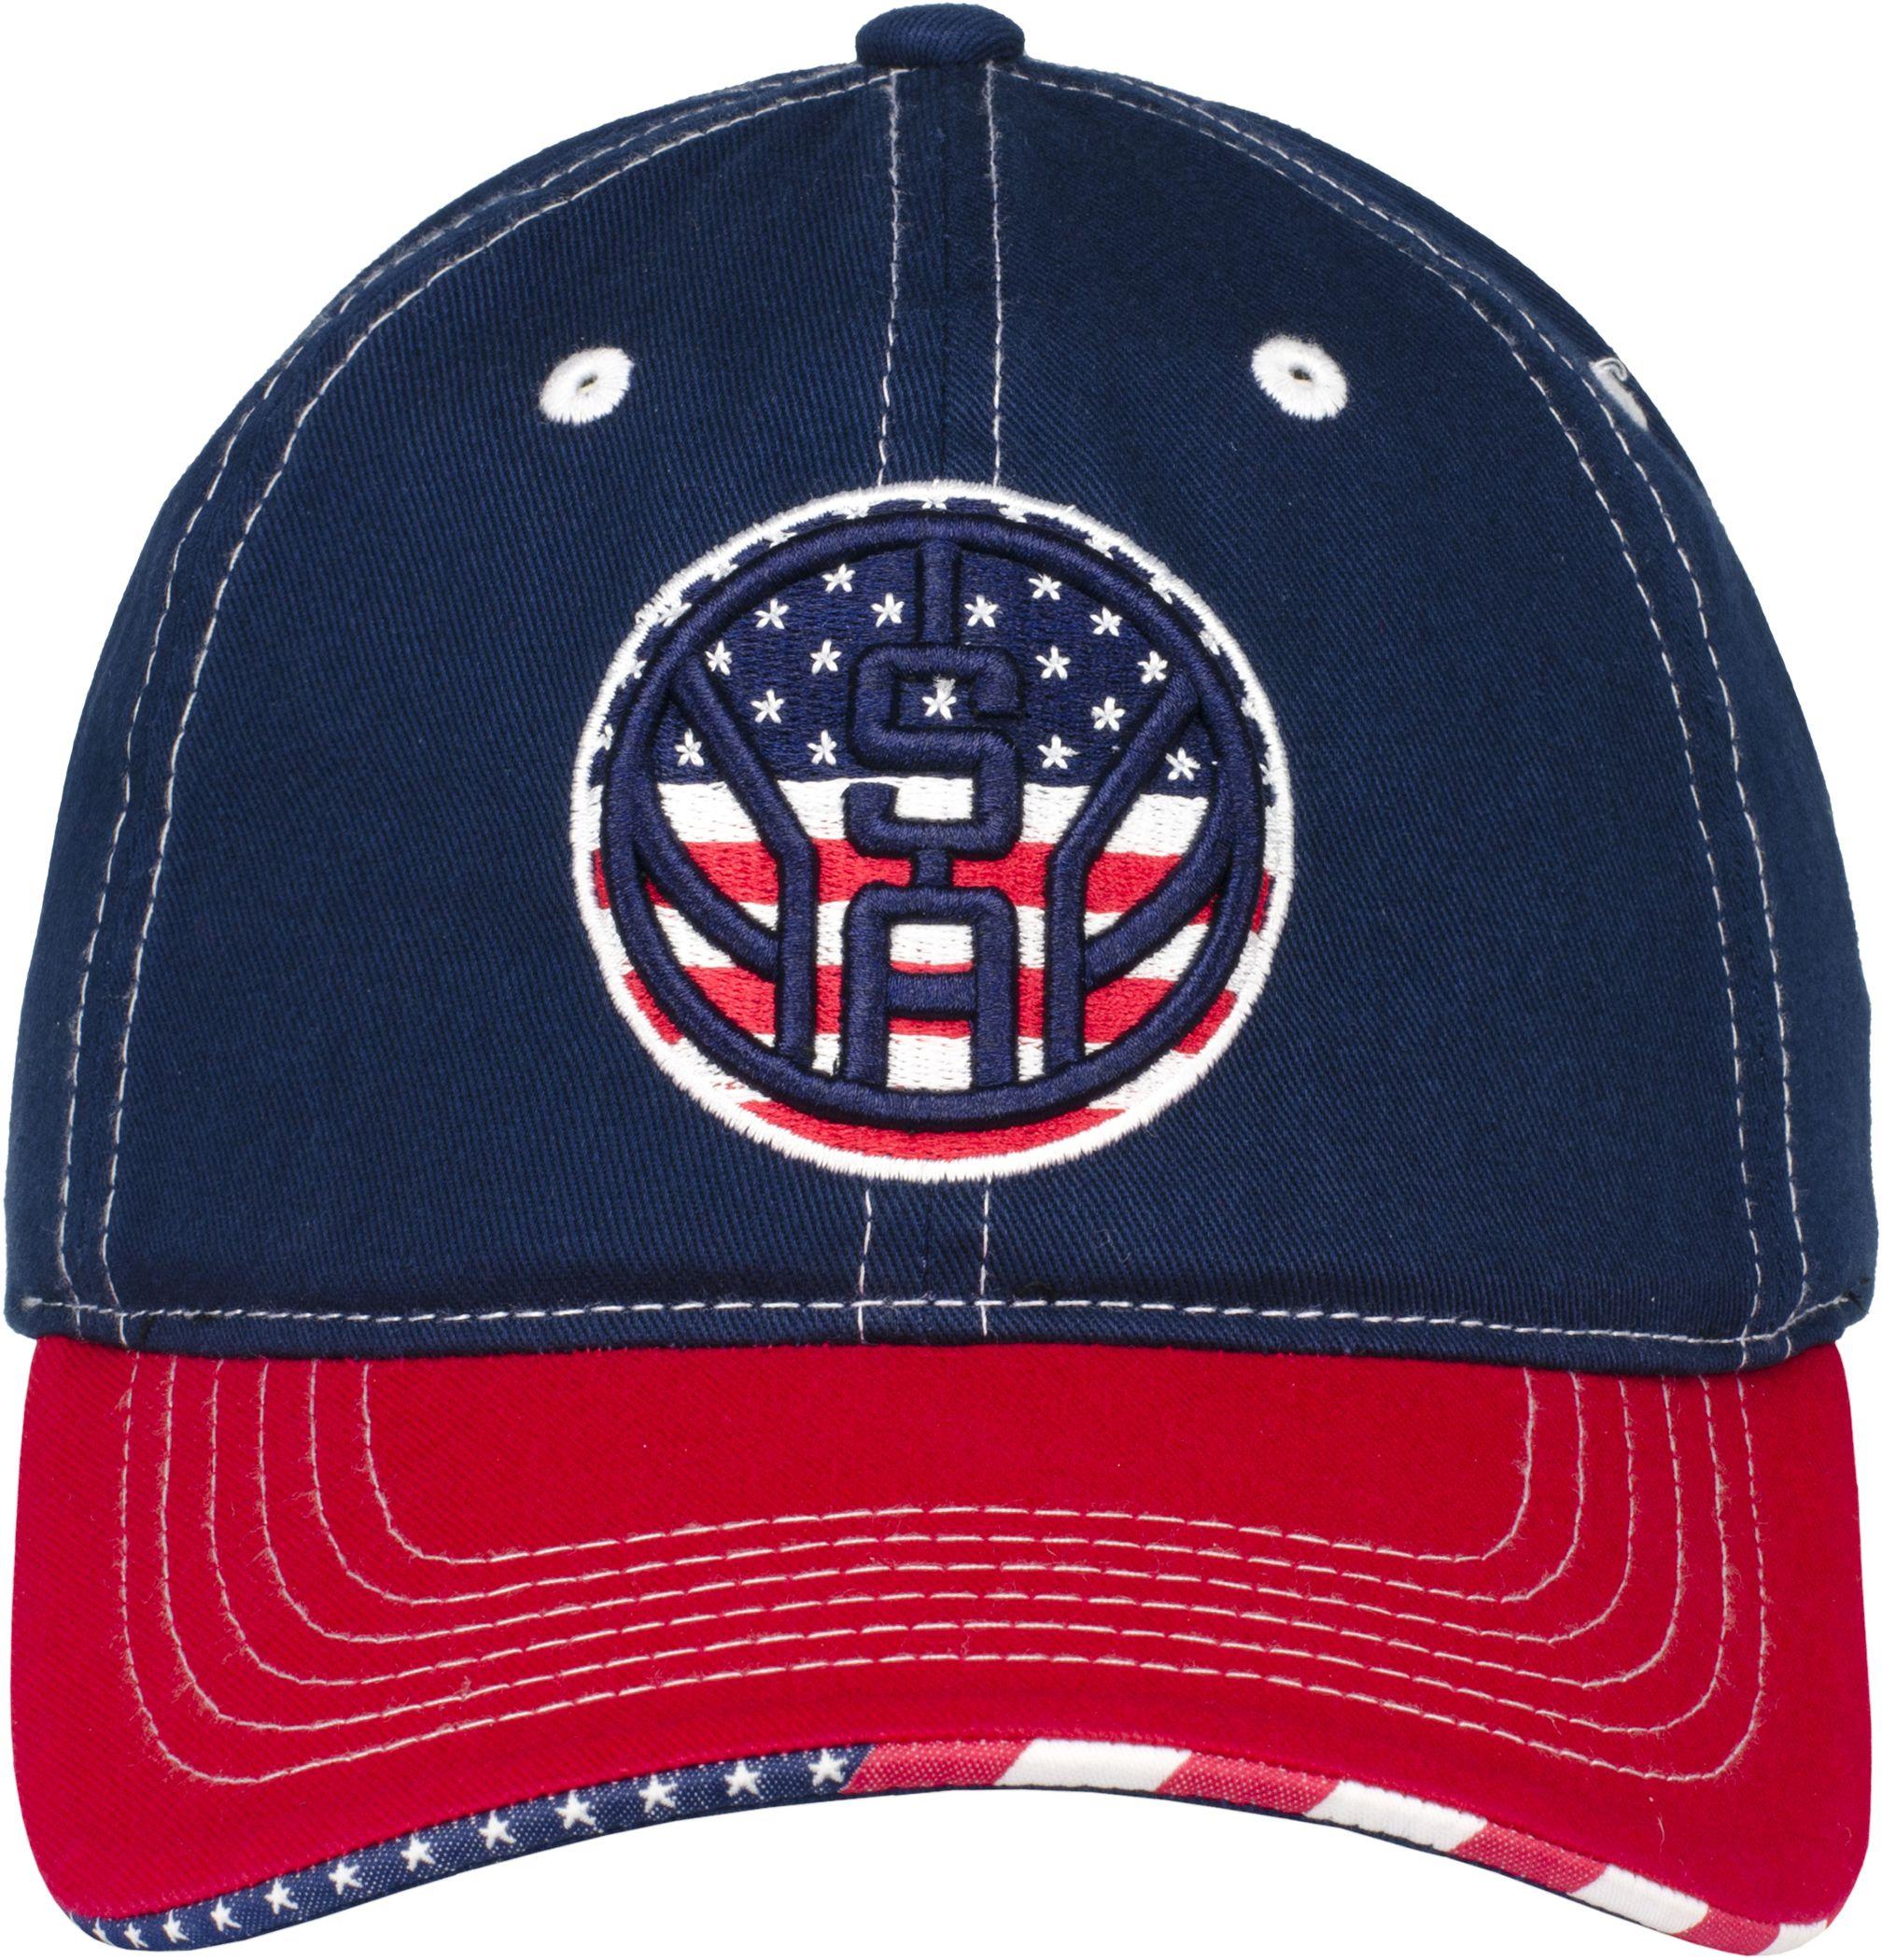 Red White and Blue Baseball Logo - San Antonio Spurs Item Of The Game Hat - Red White and Blue SAS ...